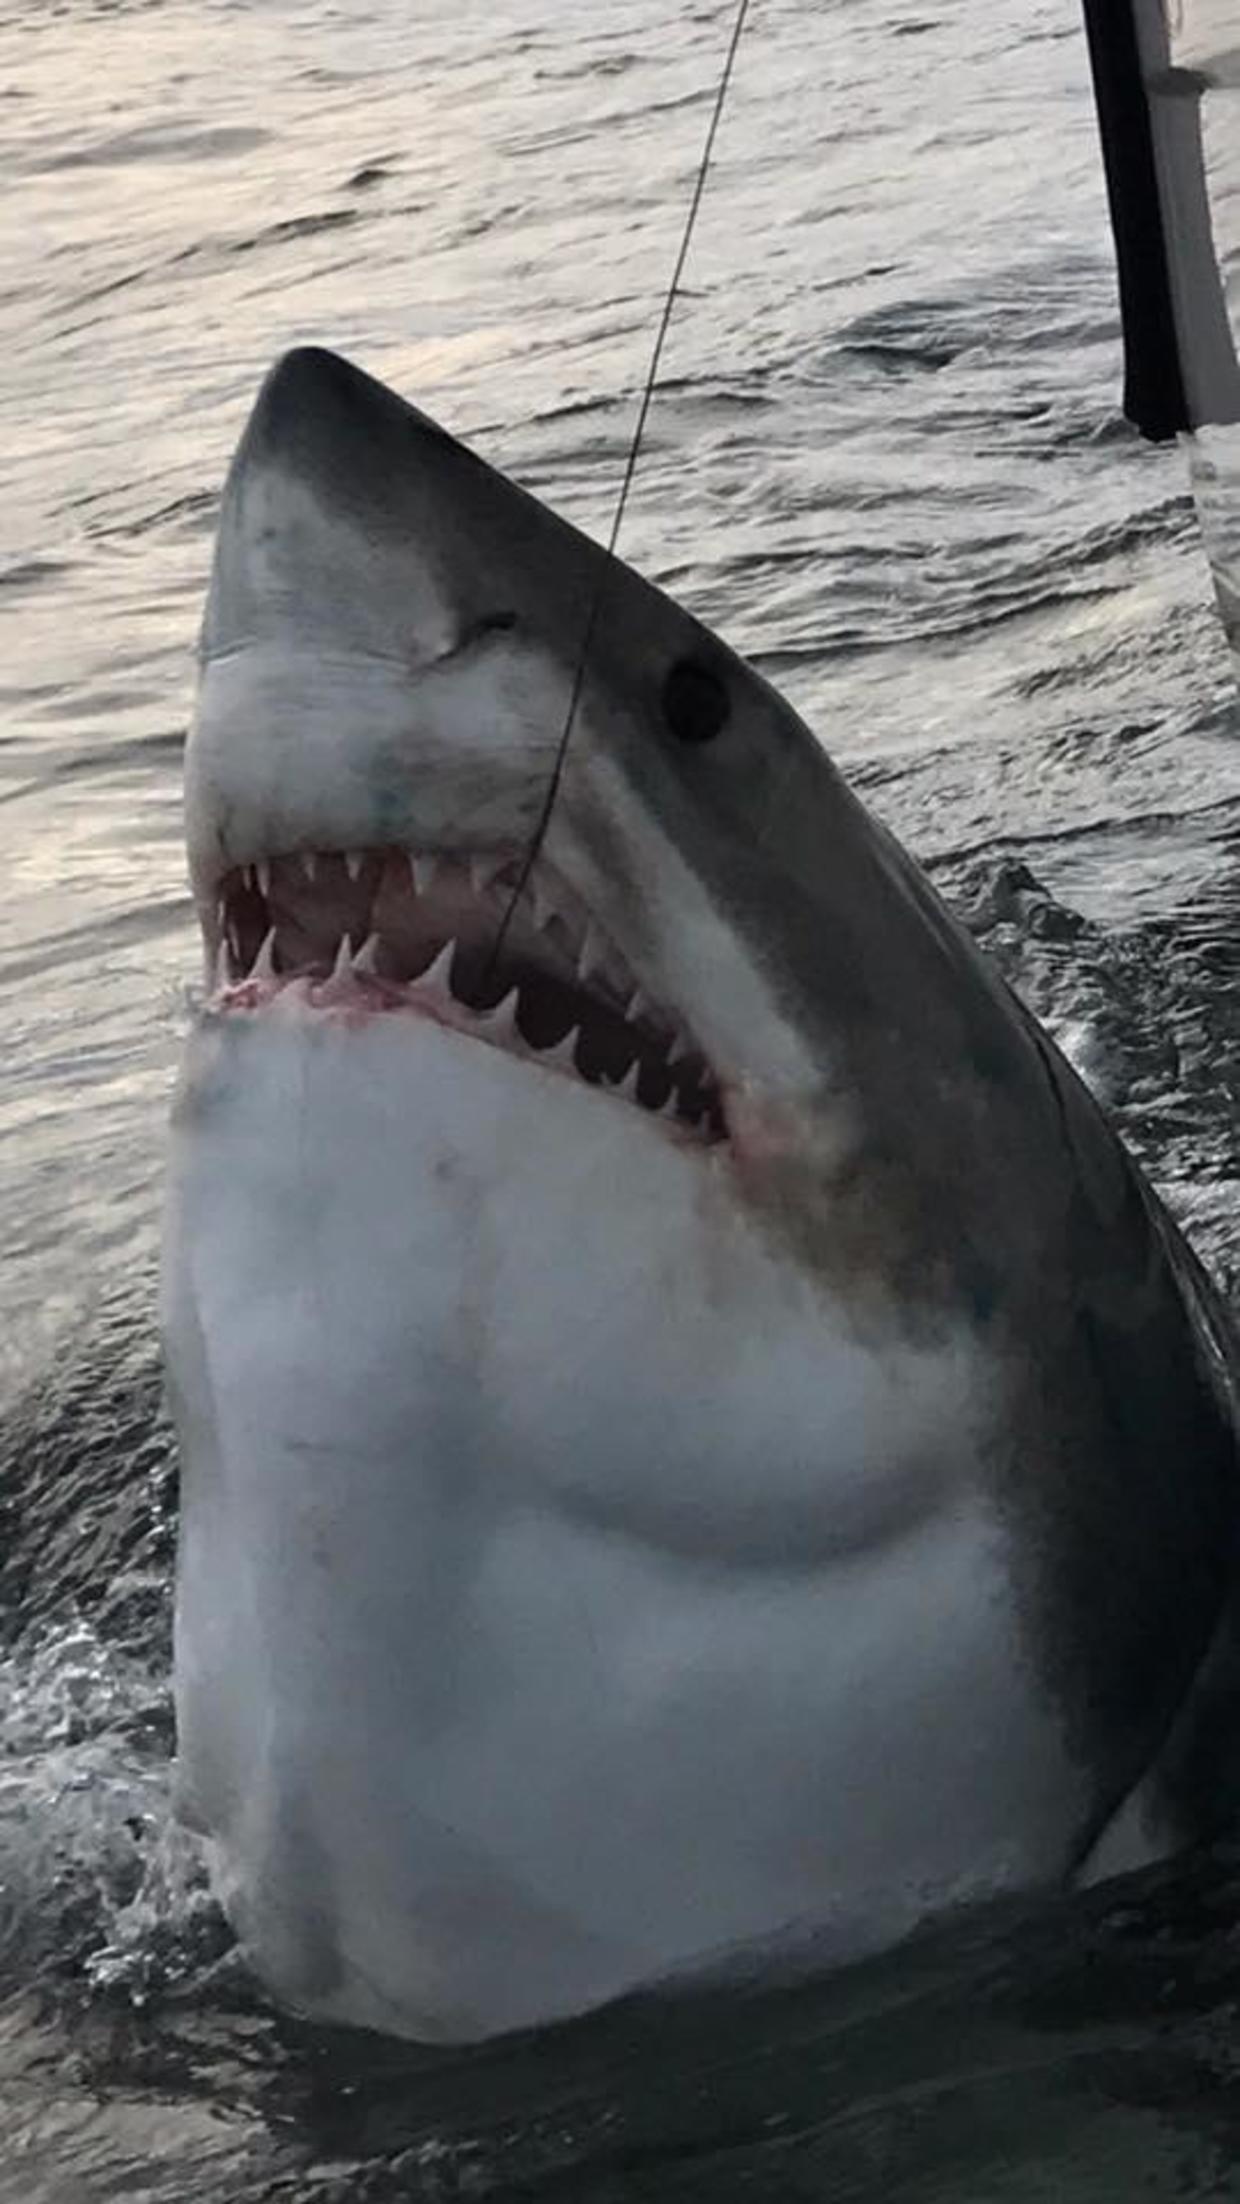 Crew catches 16foot "monster" great white shark off Hilton Head Island